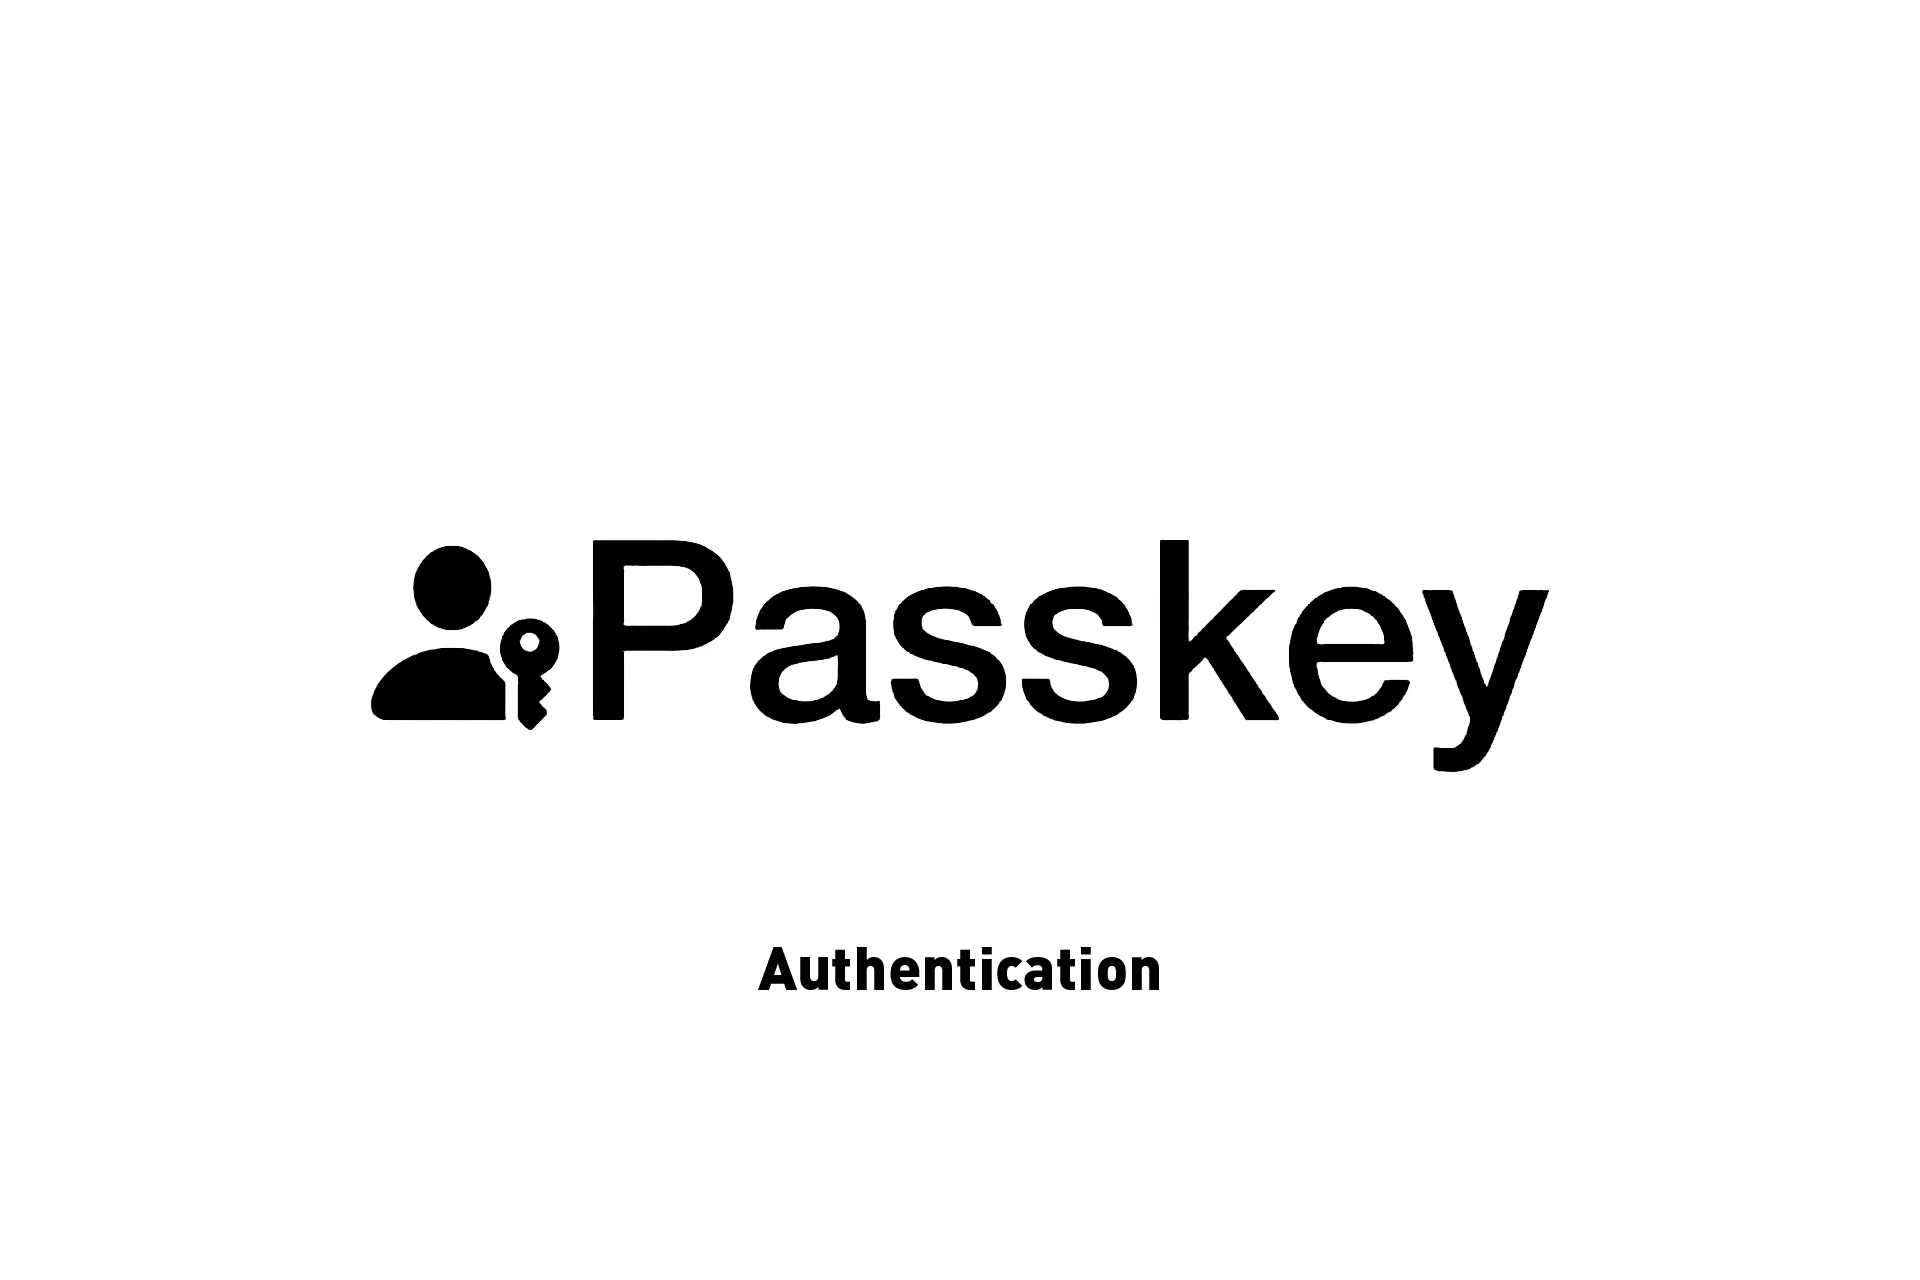 Apple's Passkey symbol with the word 'Authentication' below it.